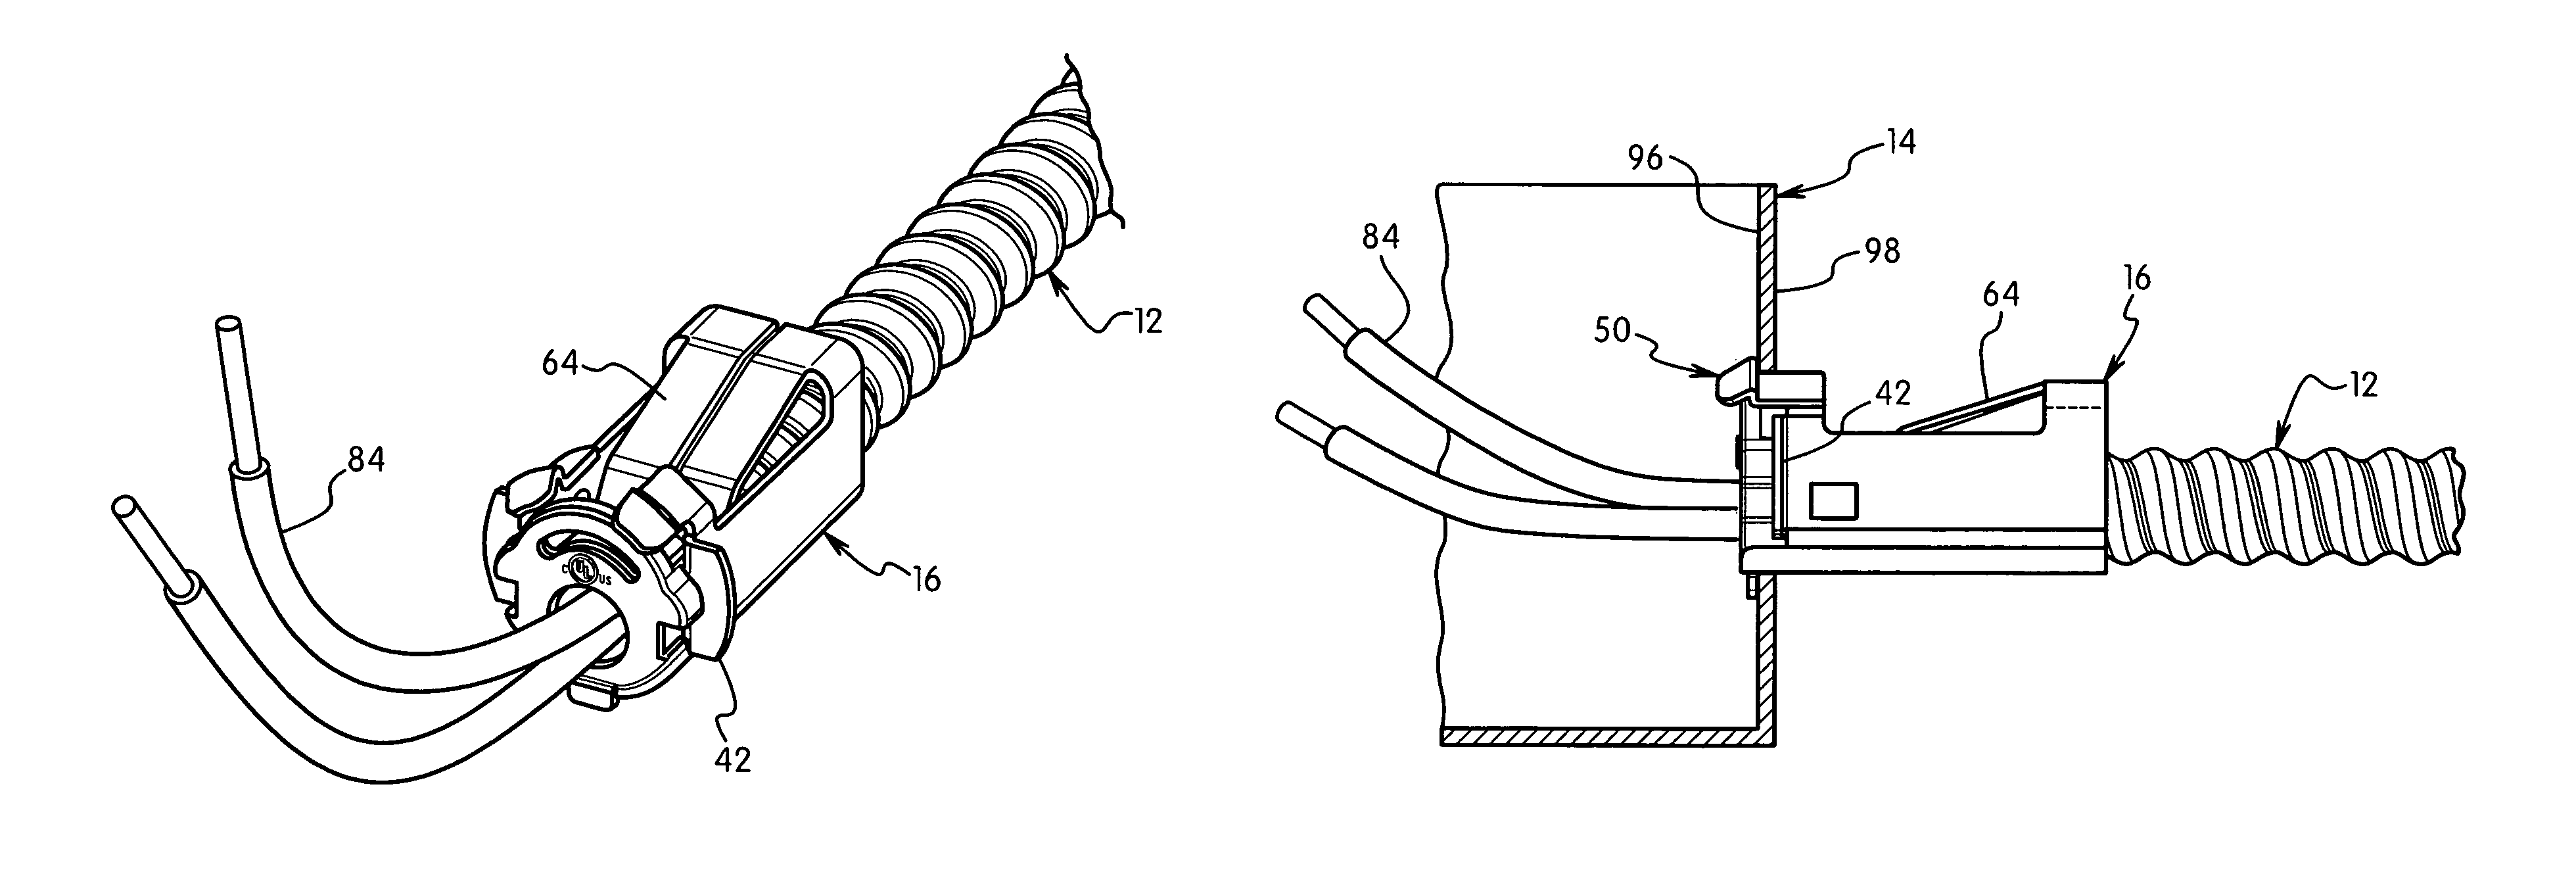 One-piece electrical cable connector having a retaining spring